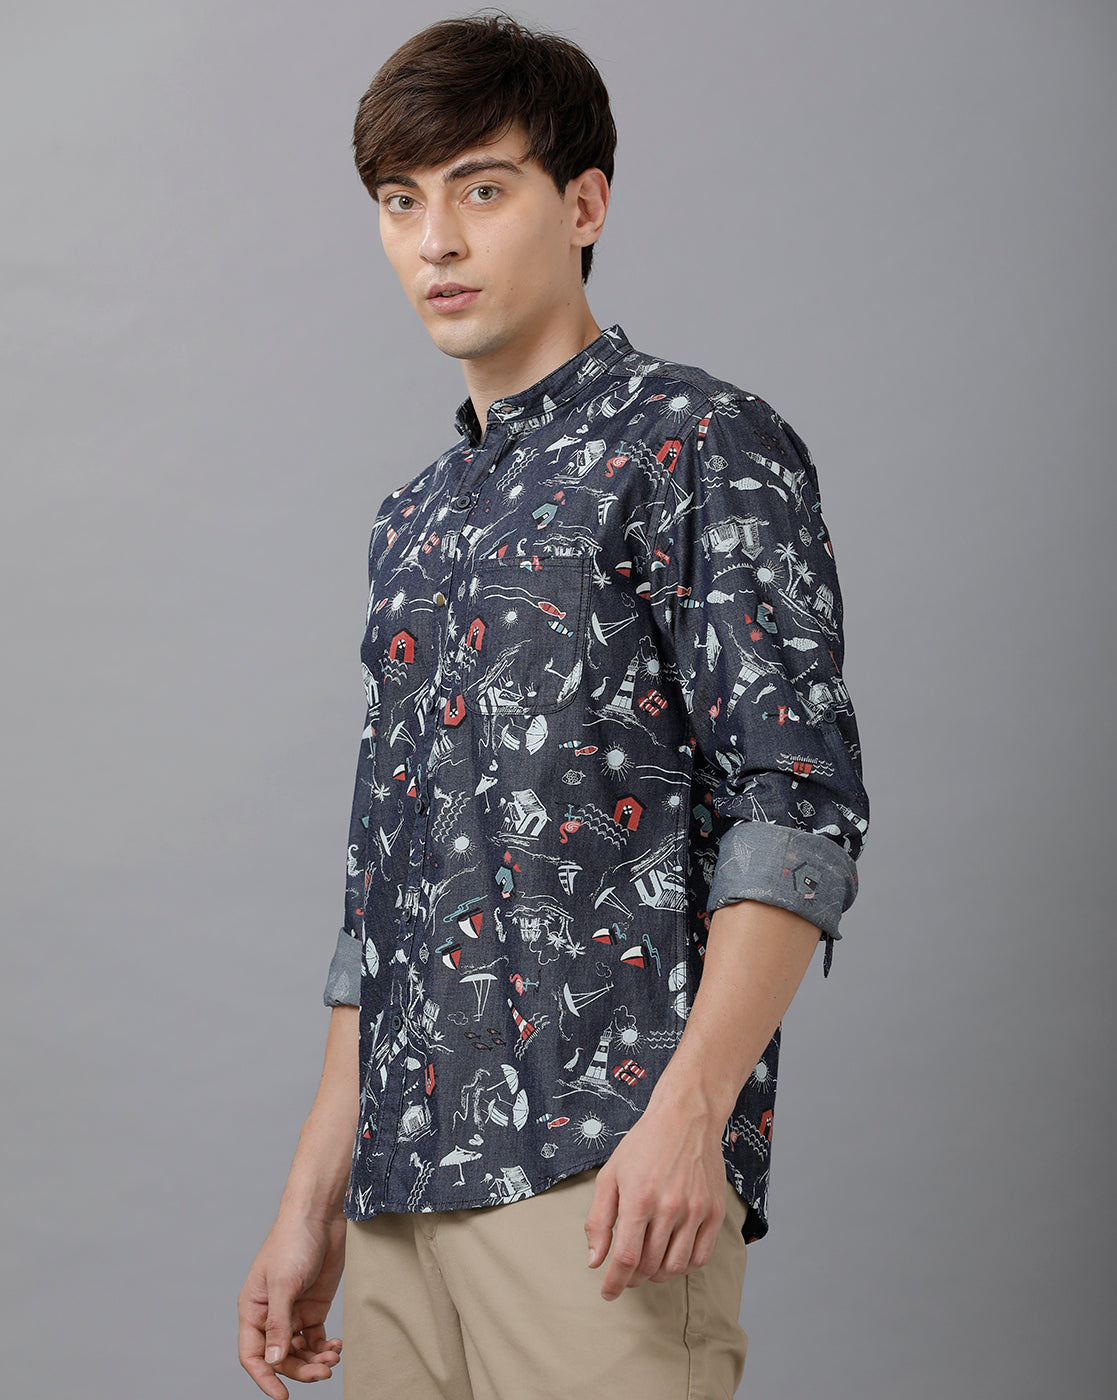 Funky shirts for men